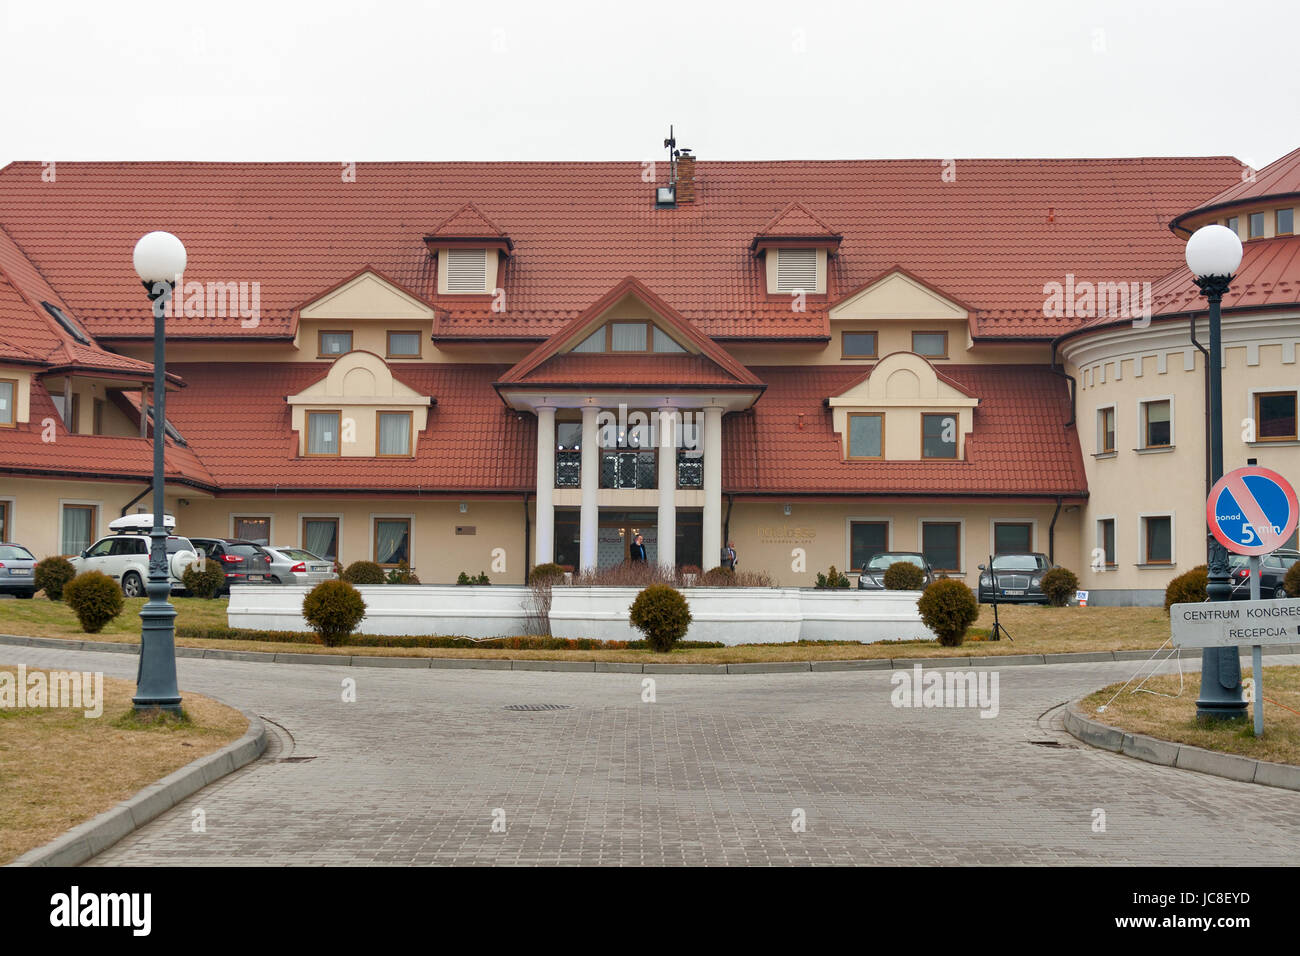 RAWA MAZOWIECKA, POLAND - MARCH 07, 2015: Cars parked in front of luxury Hotel Ossa Congress and Spa during international congress. Hotel is situated  Stock Photo